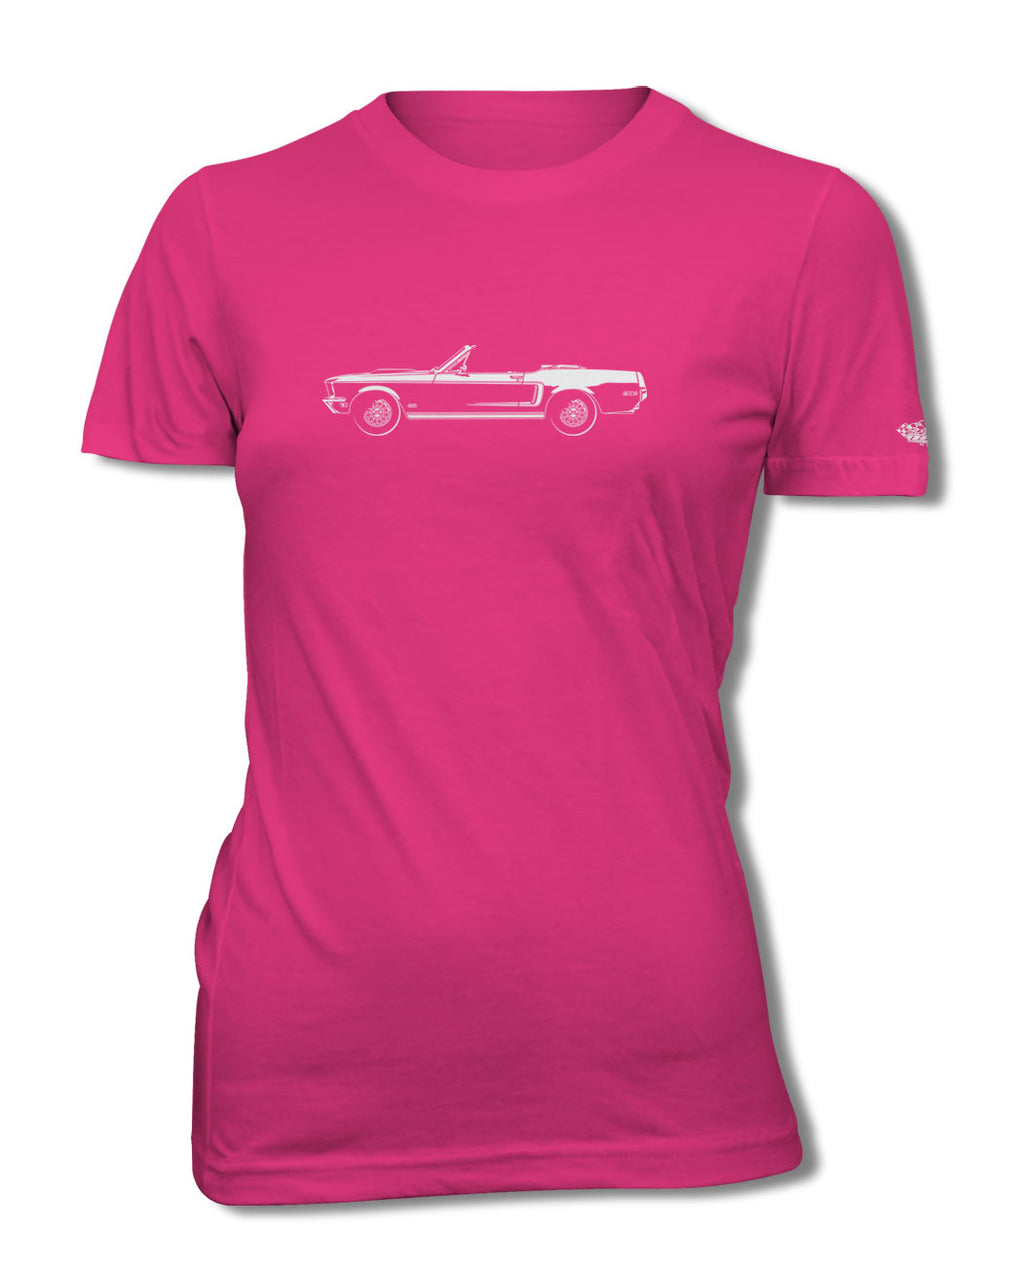 1968 Ford Mustang GT Convertible with Stripes T-Shirt - Women - Side View